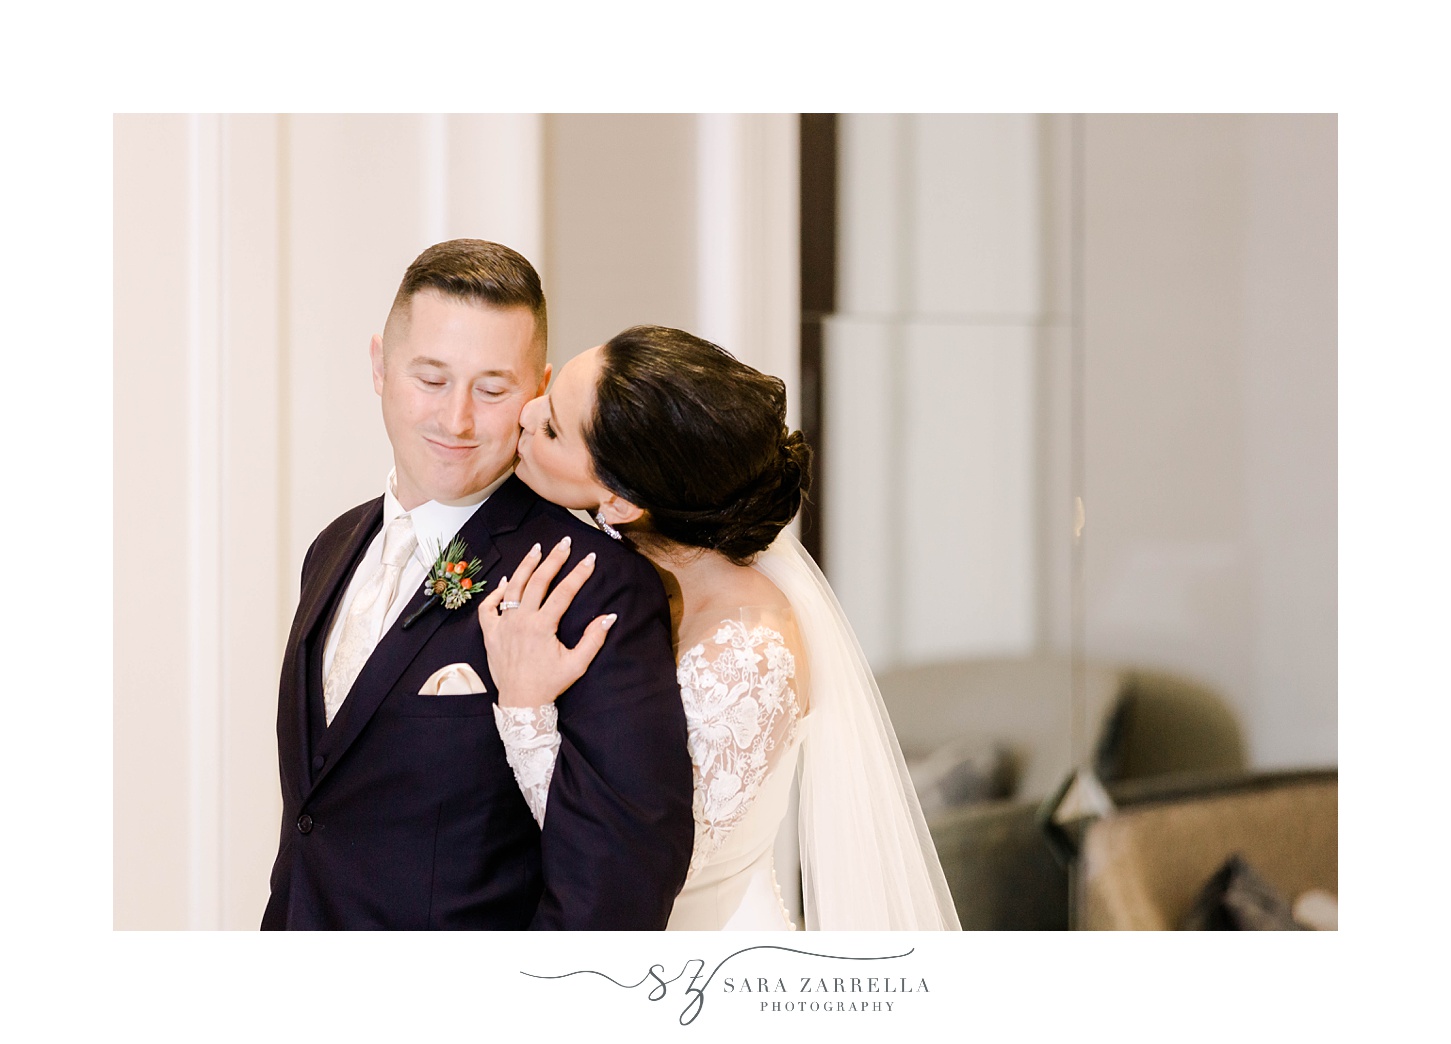 bride in wedding gown with lace sleeves leans to kiss groom's cheek from behind him